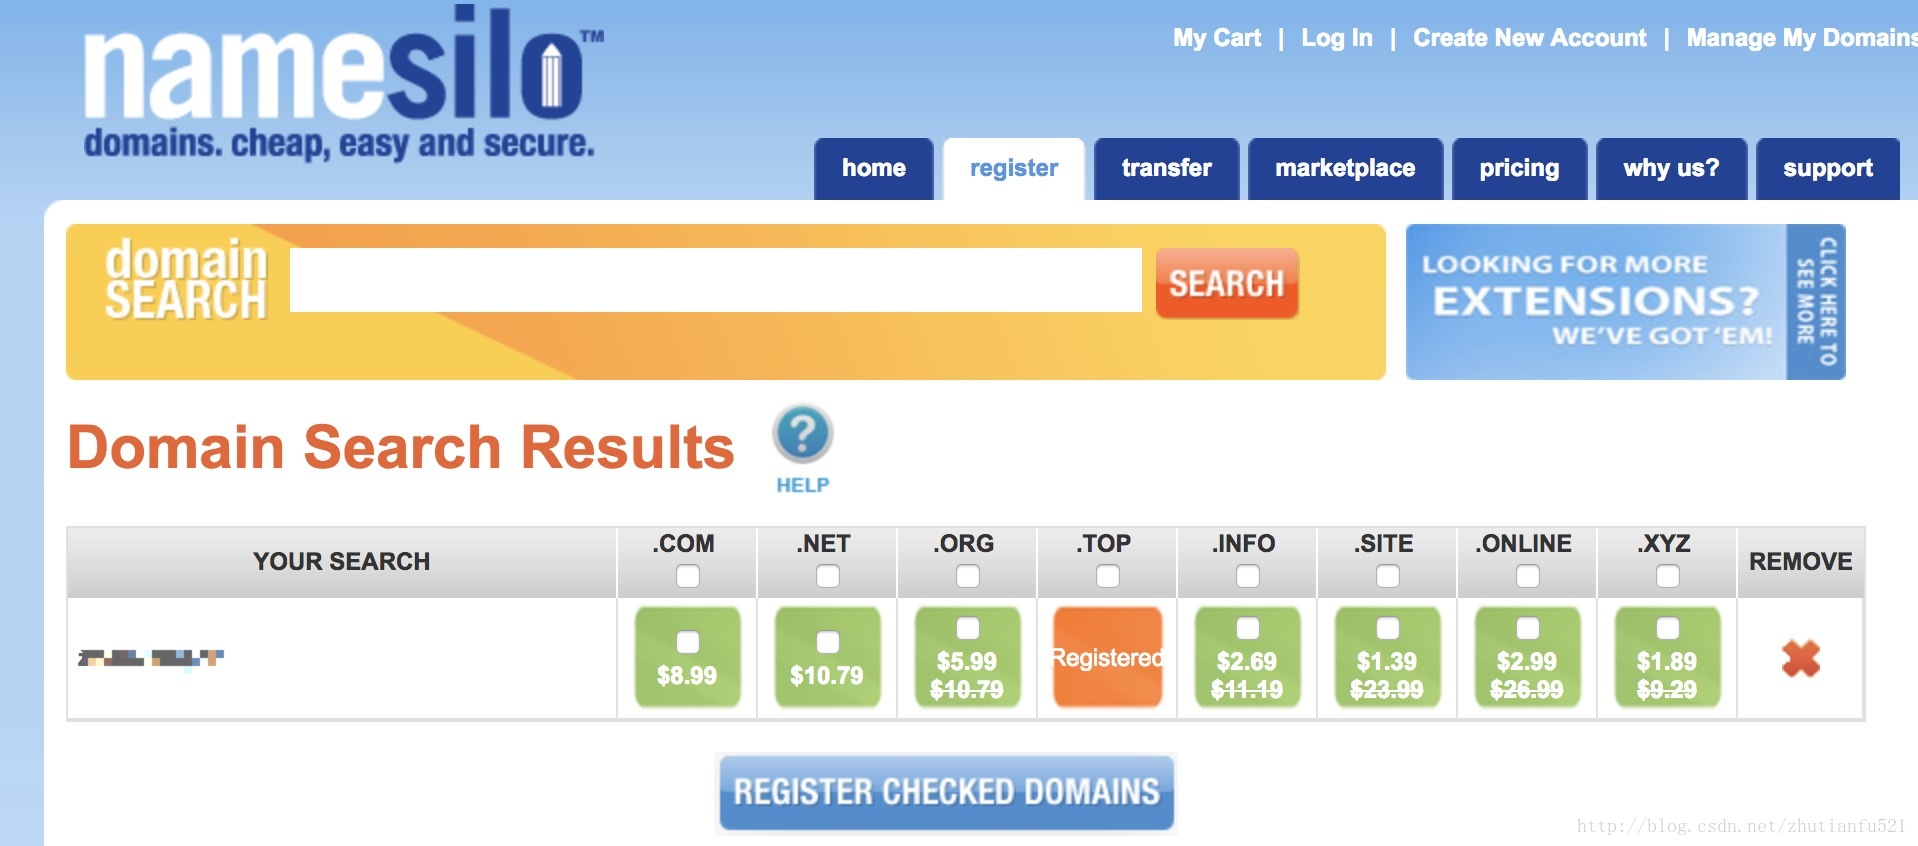 Search domain пример. NAMESILO. Registration search. Extension of domains to all r^2.